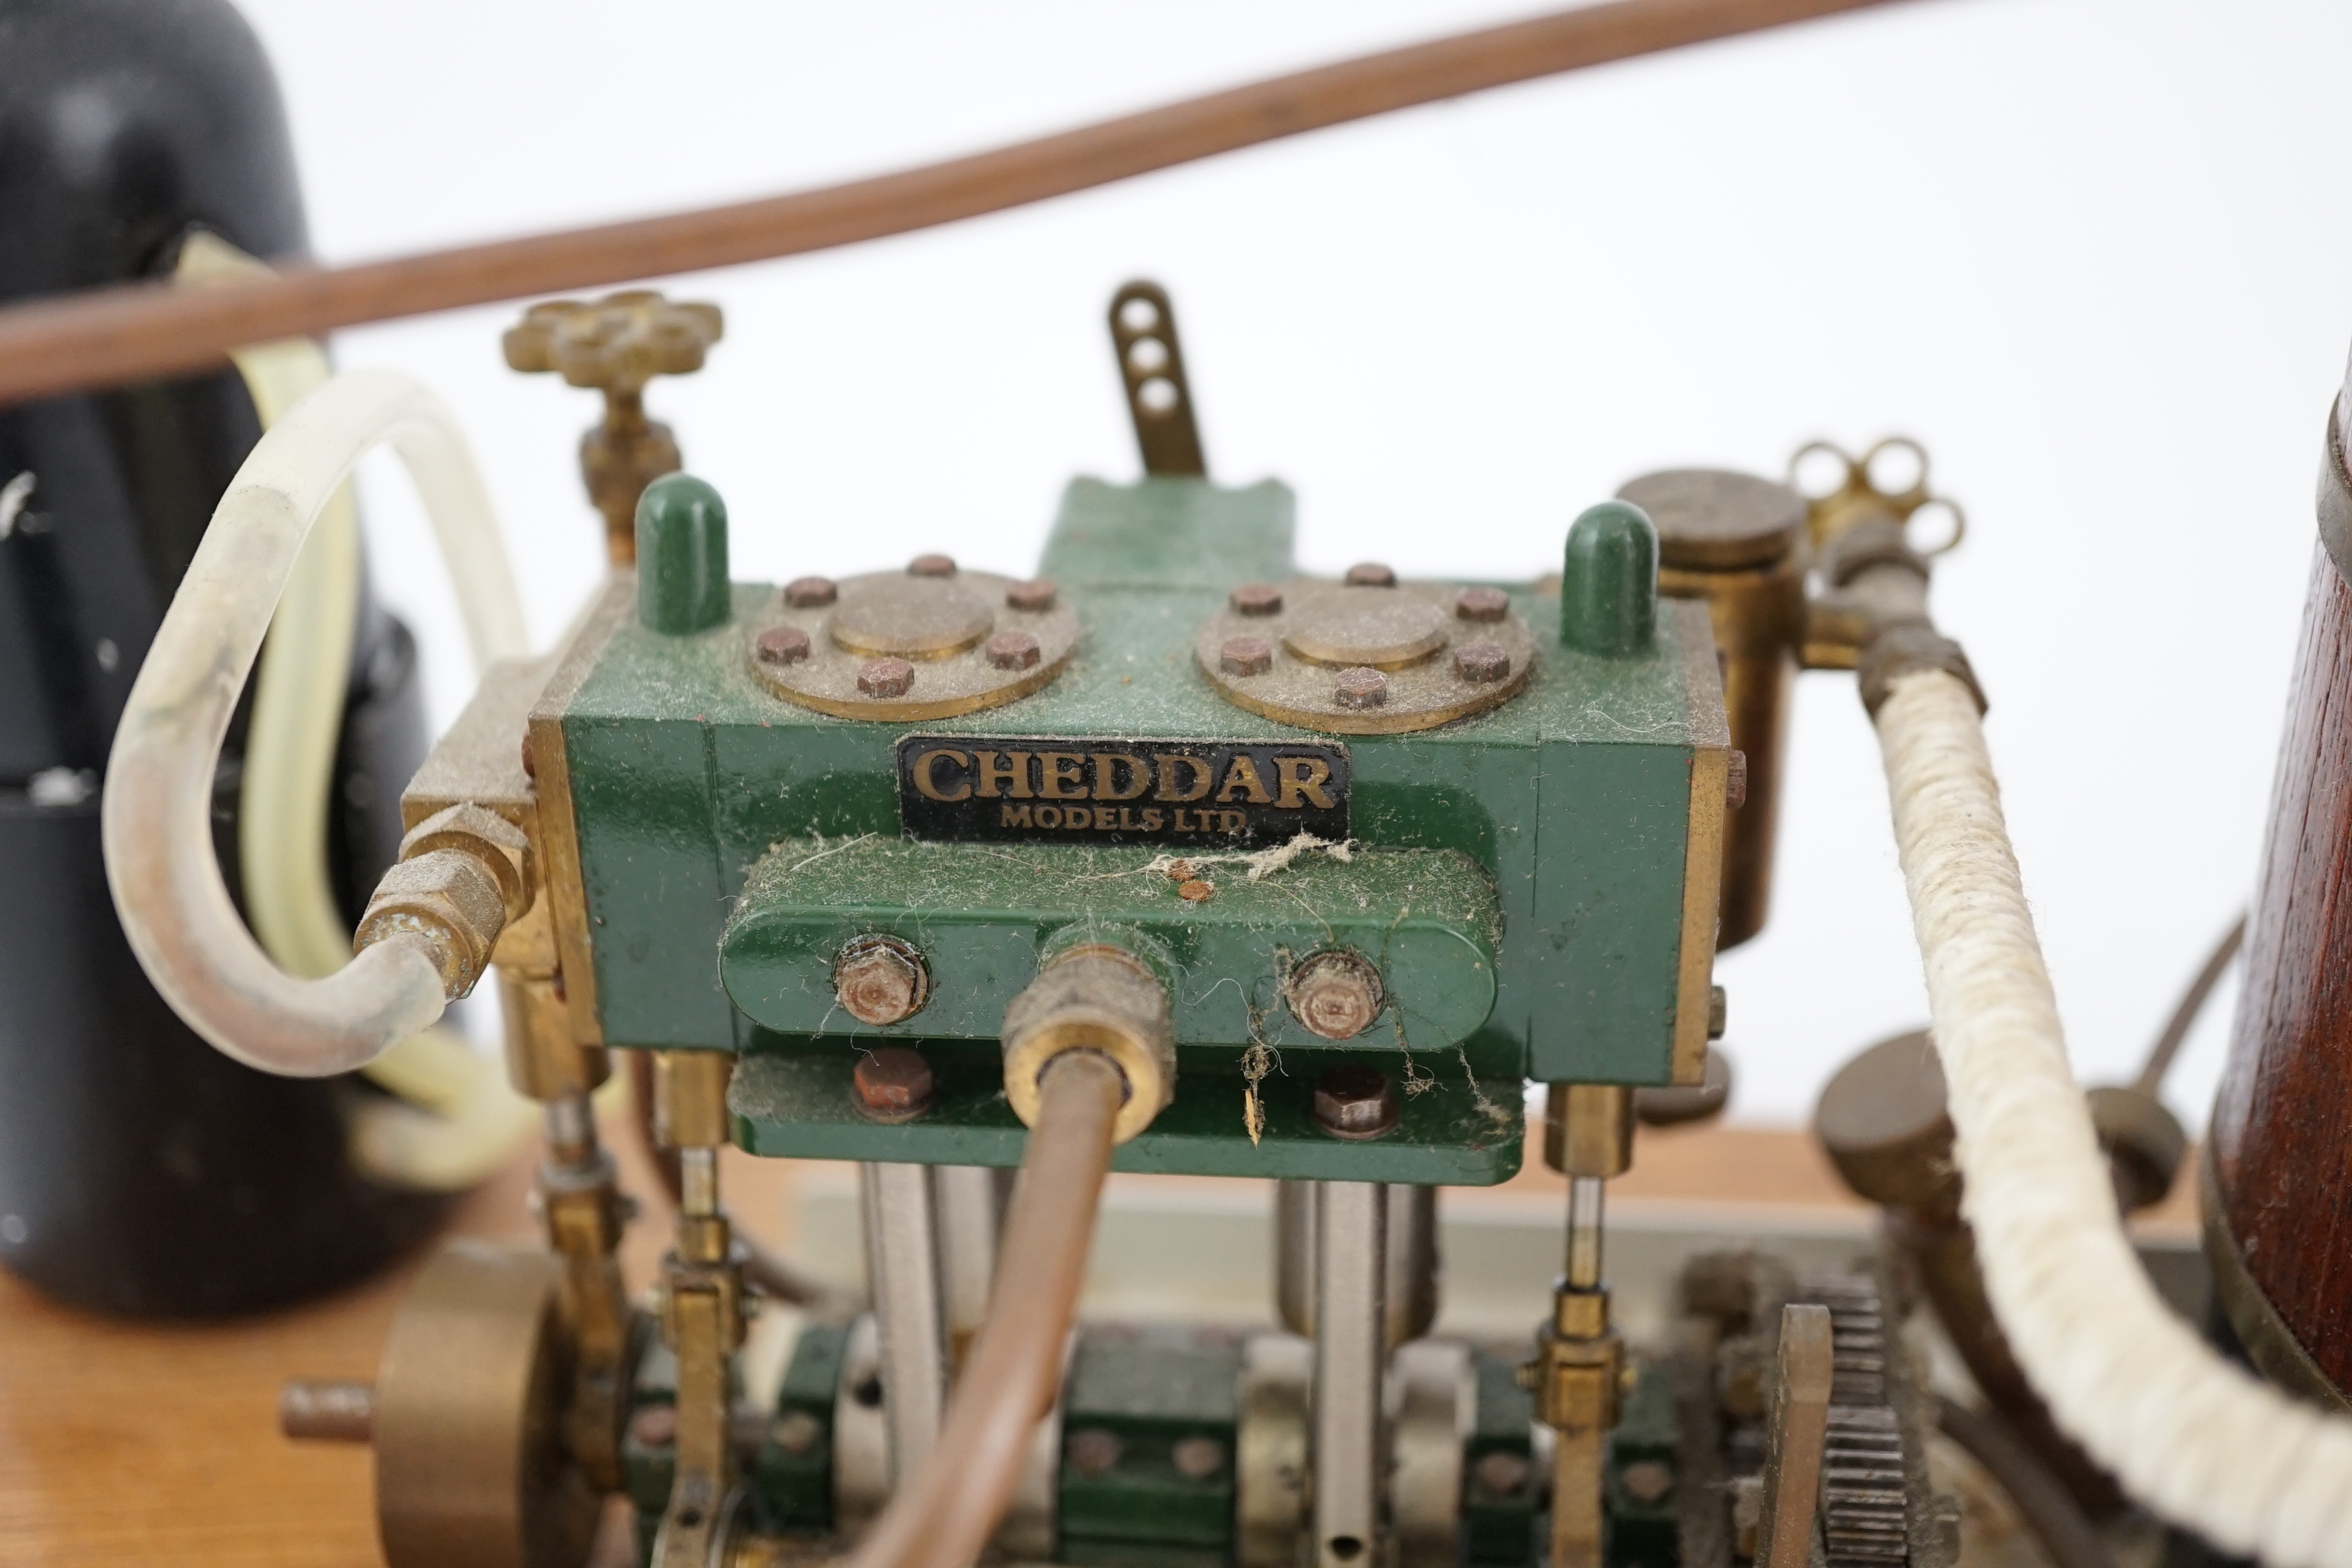 A Cheddar Models Ltd. Proteus steam plant, a gas fired vertical boiler two cylinder marine engine, with a wood clad copper boiler fitted with pressure gauge, water sight glass and safety valve